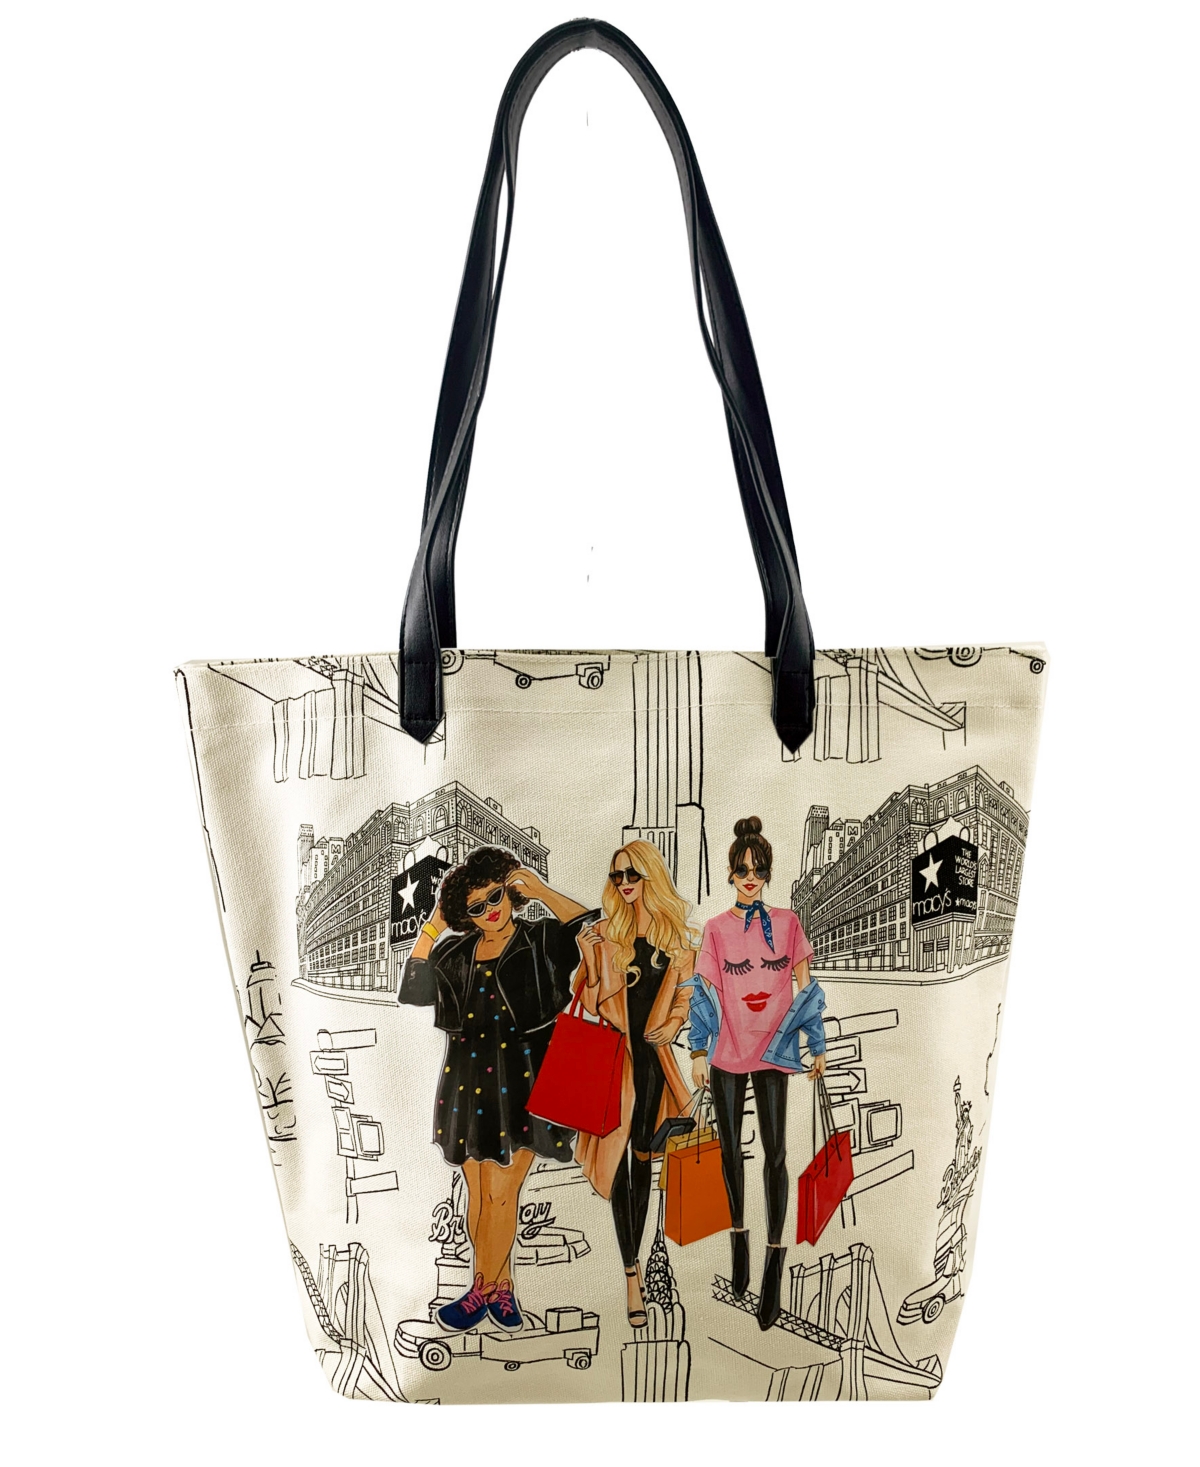 MACY'S NEW YORK CITY CANVAS TOTE, CREATED FOR MACY'S